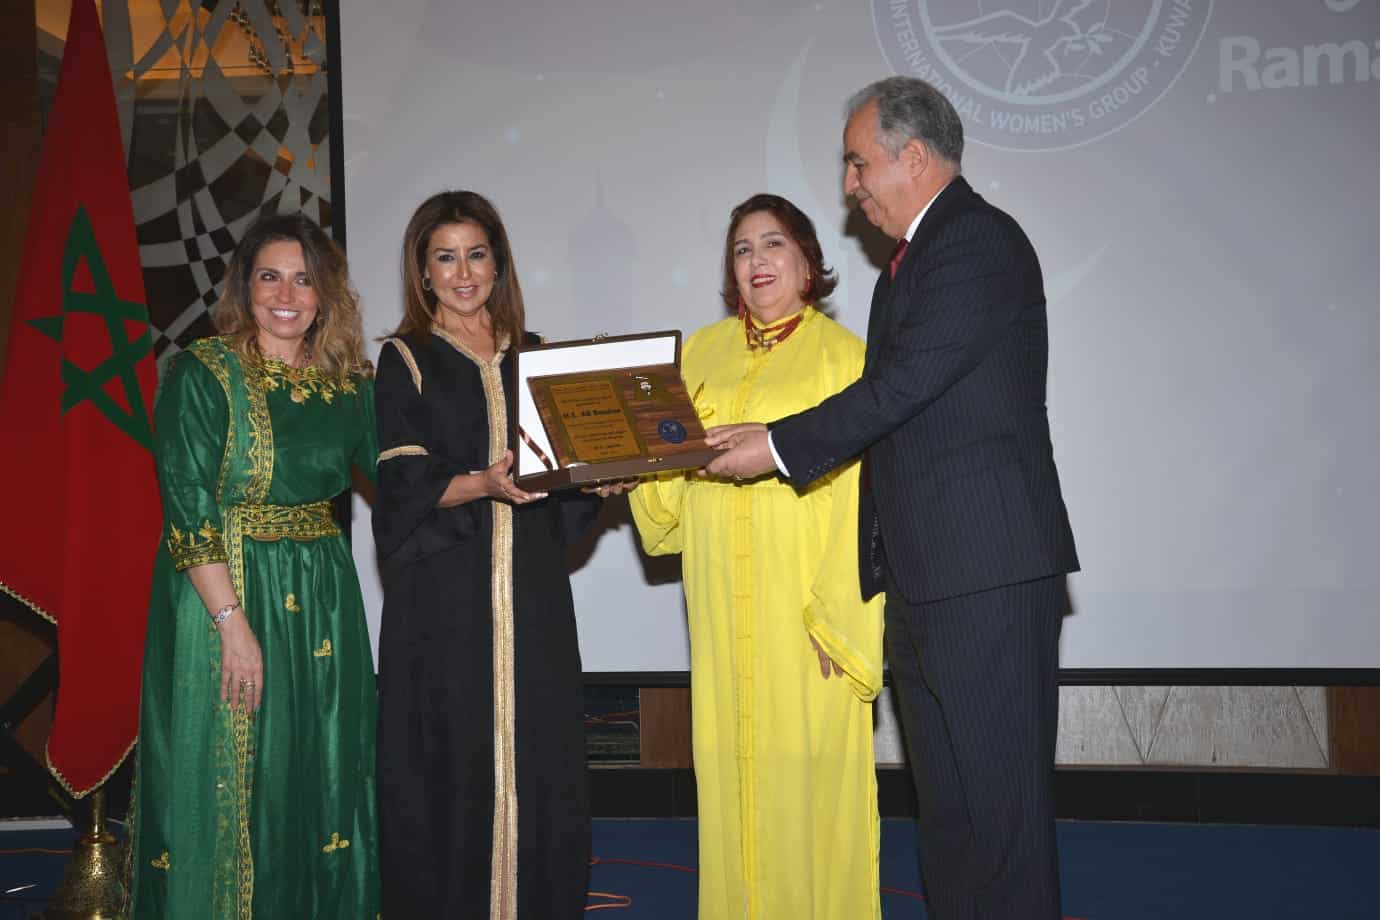 KUWAIT: (From left) President of IWG Ghada Shawky and Honorary President of the IWG Sheikha Hanouf Bader Mohammed Al-Sabah presents the Moroccan ambassador’s spouse Aicha Al-Fasi and Ambassa- dor of the Kingdom of Morocco Ali Benaissa with a souvenir at the event.